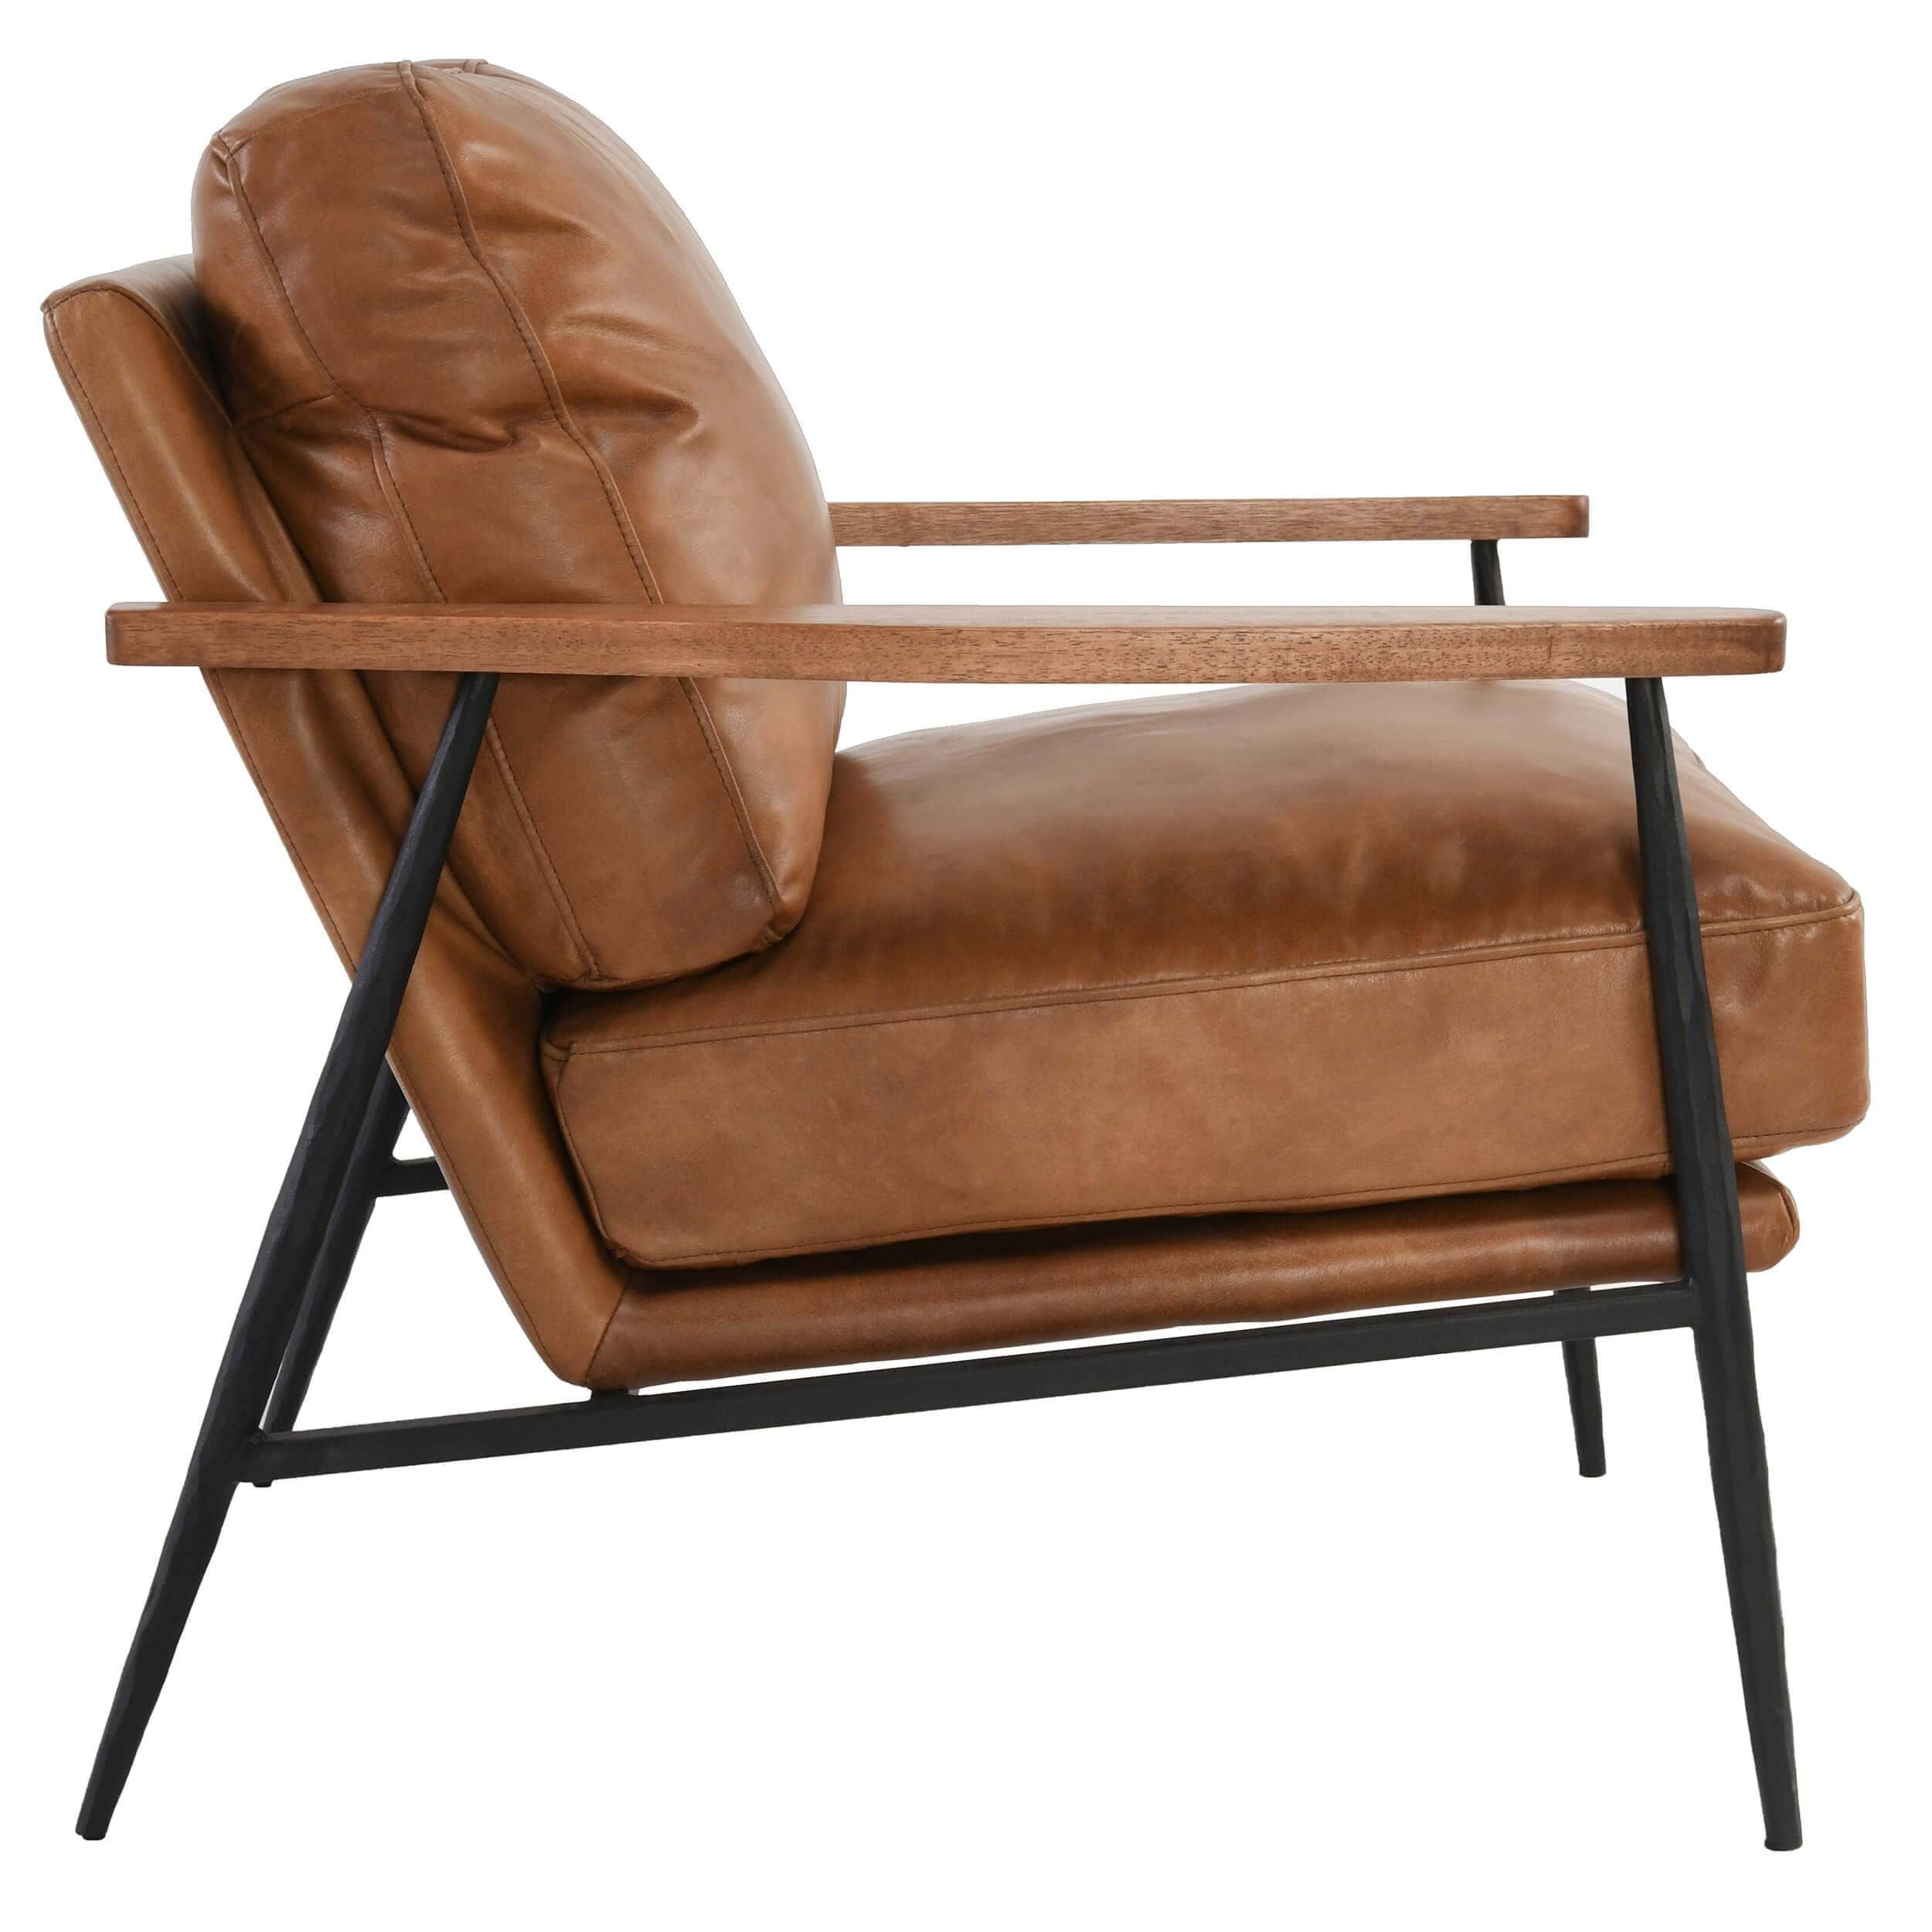 Leather Chairs: Timeless and Elegant Seating Options for Your Home